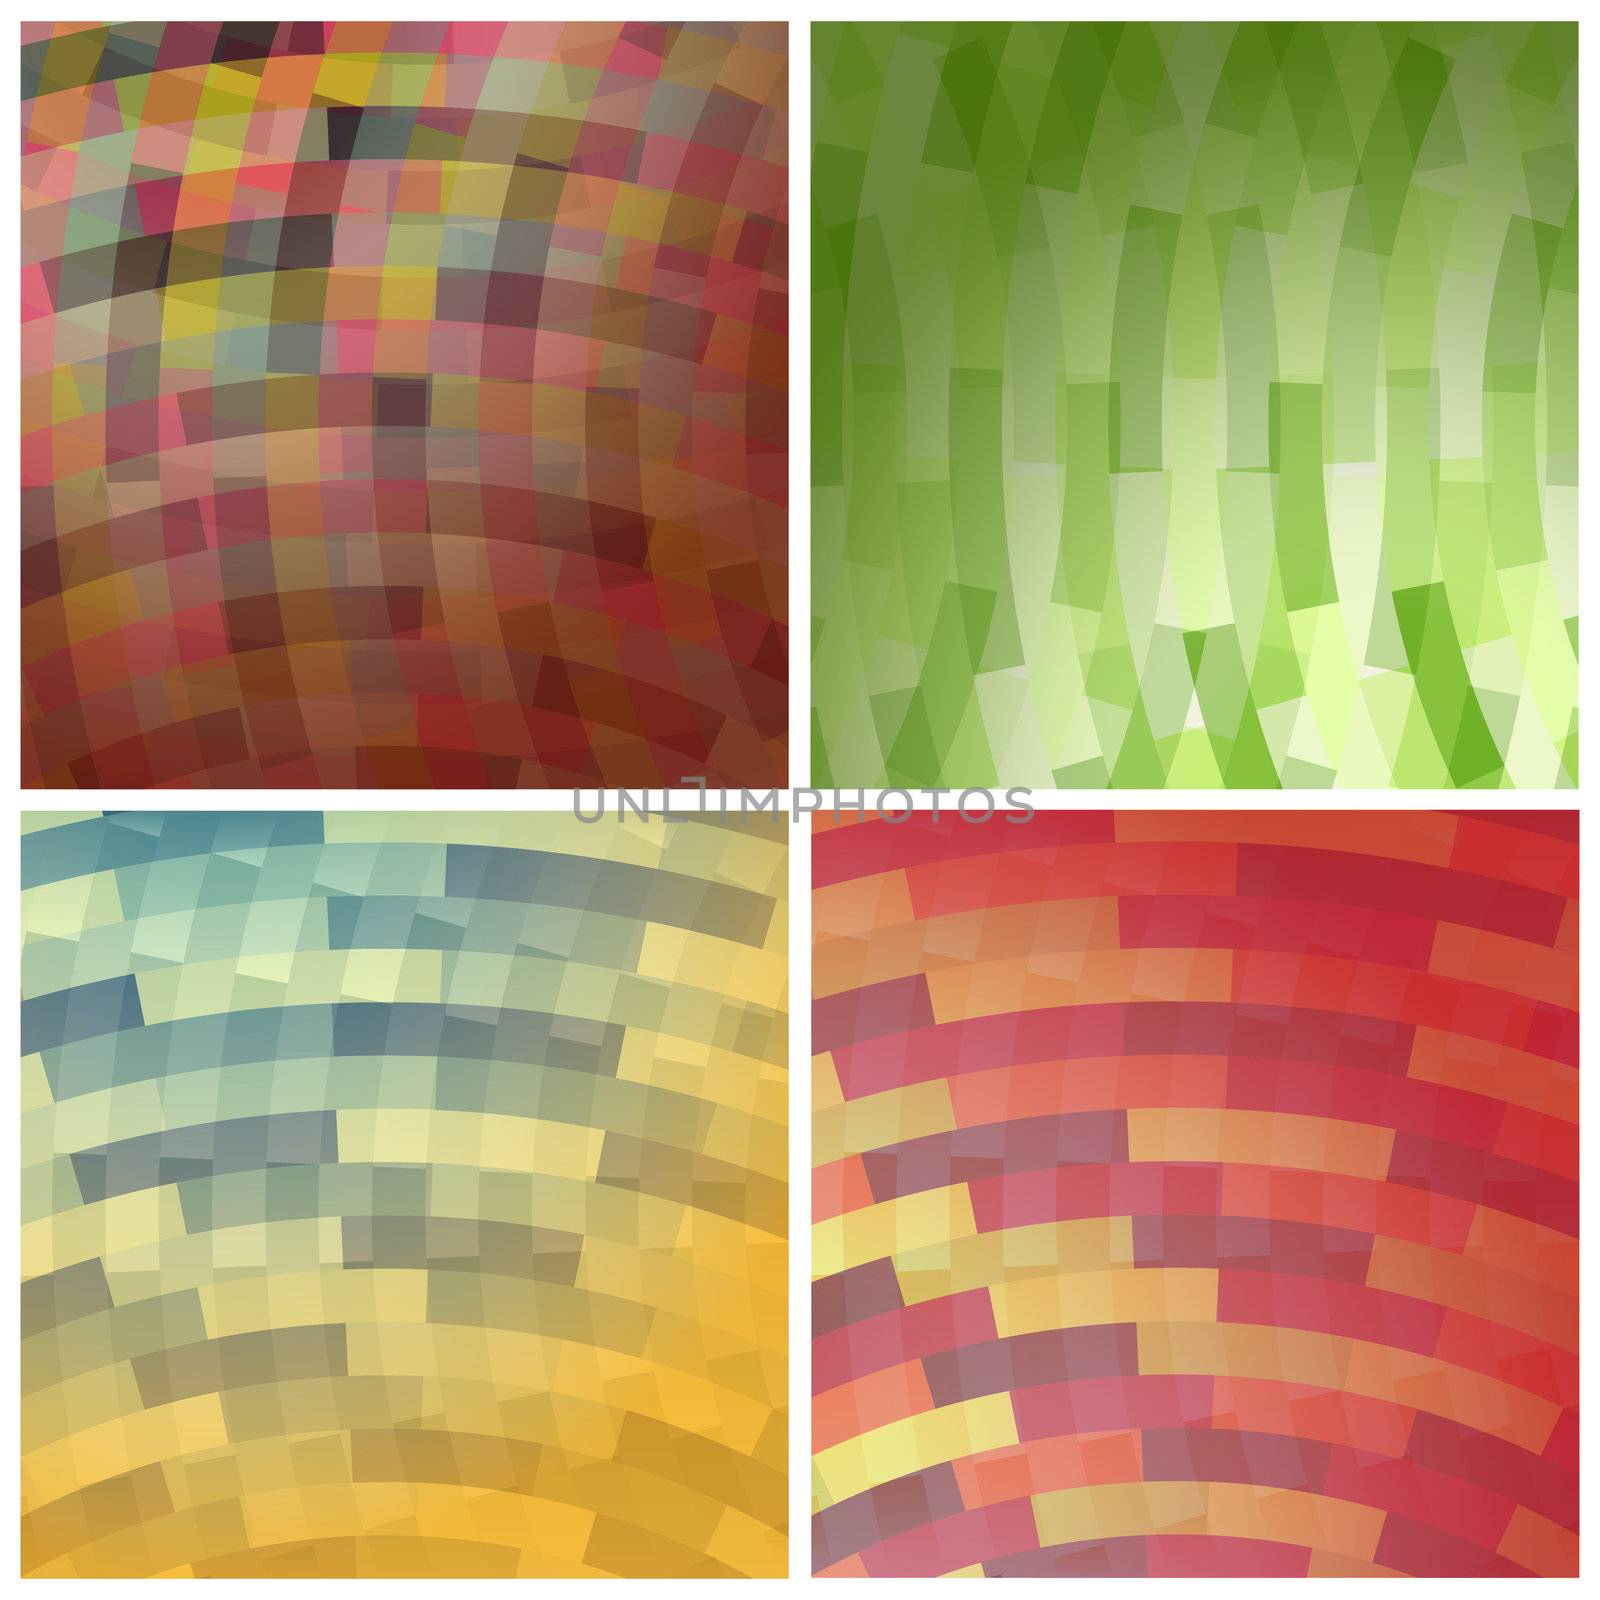 new royalty free set with abstract backgrounds can use like wallpaper